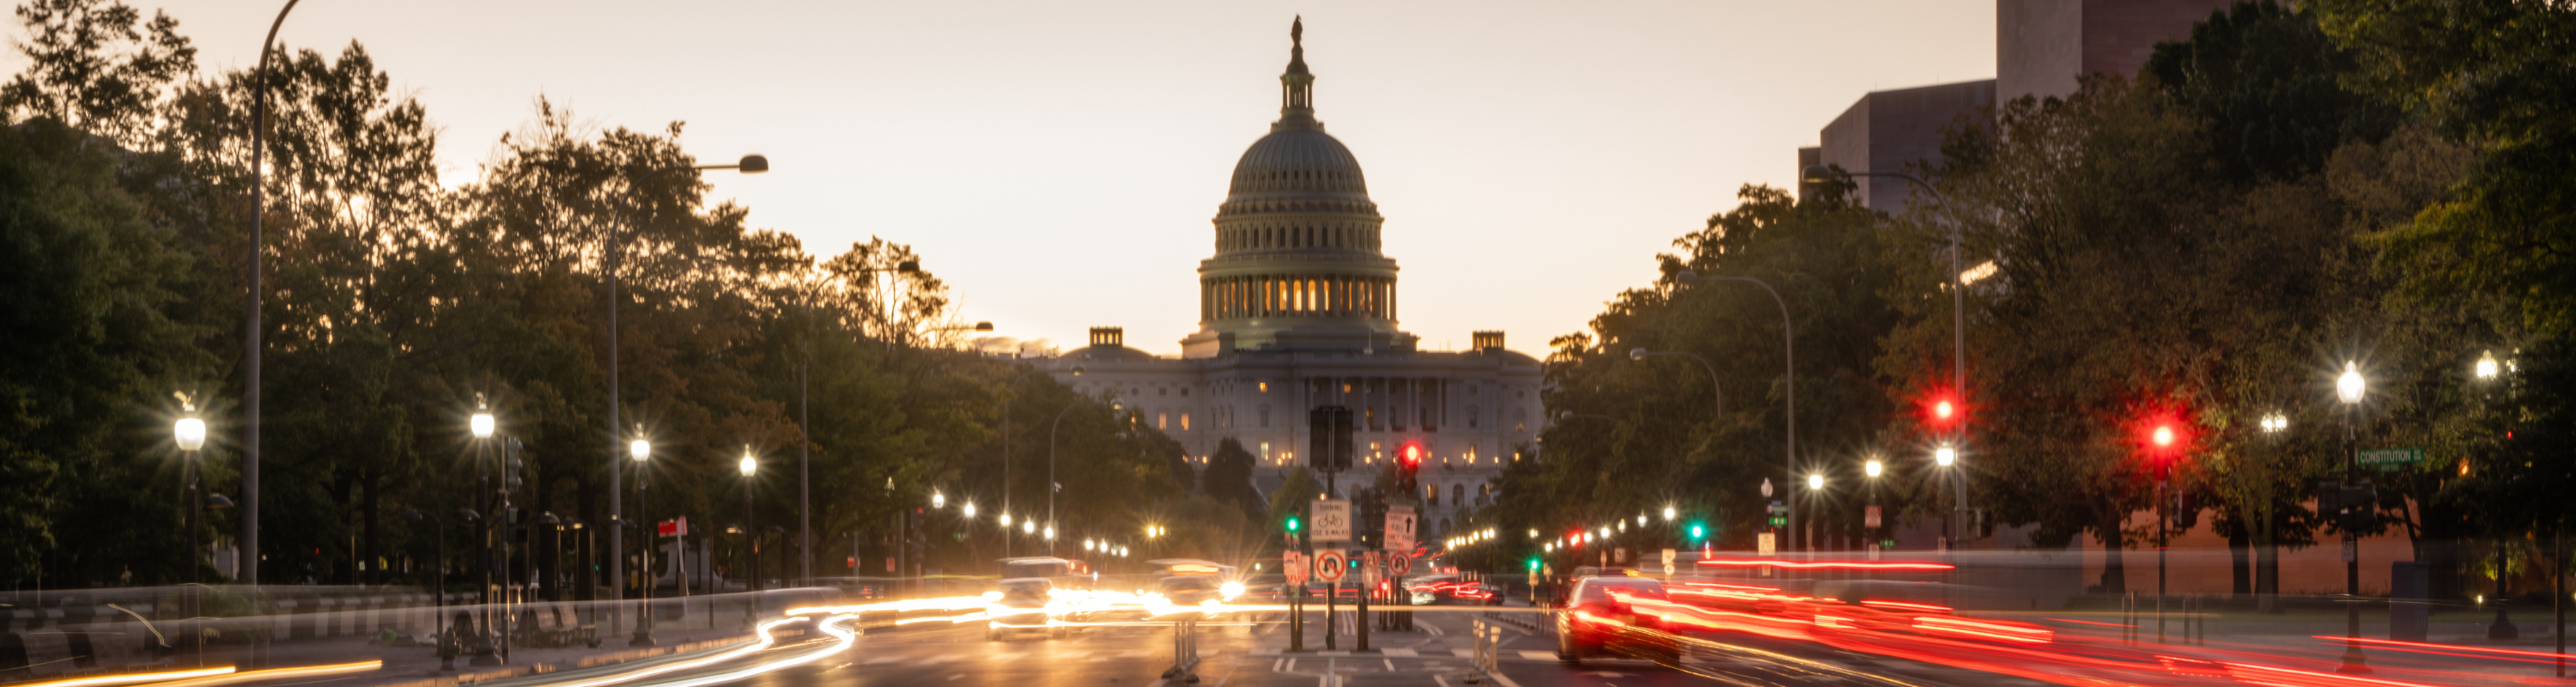 The US Capitol building at dusk at the end of a busy city street.